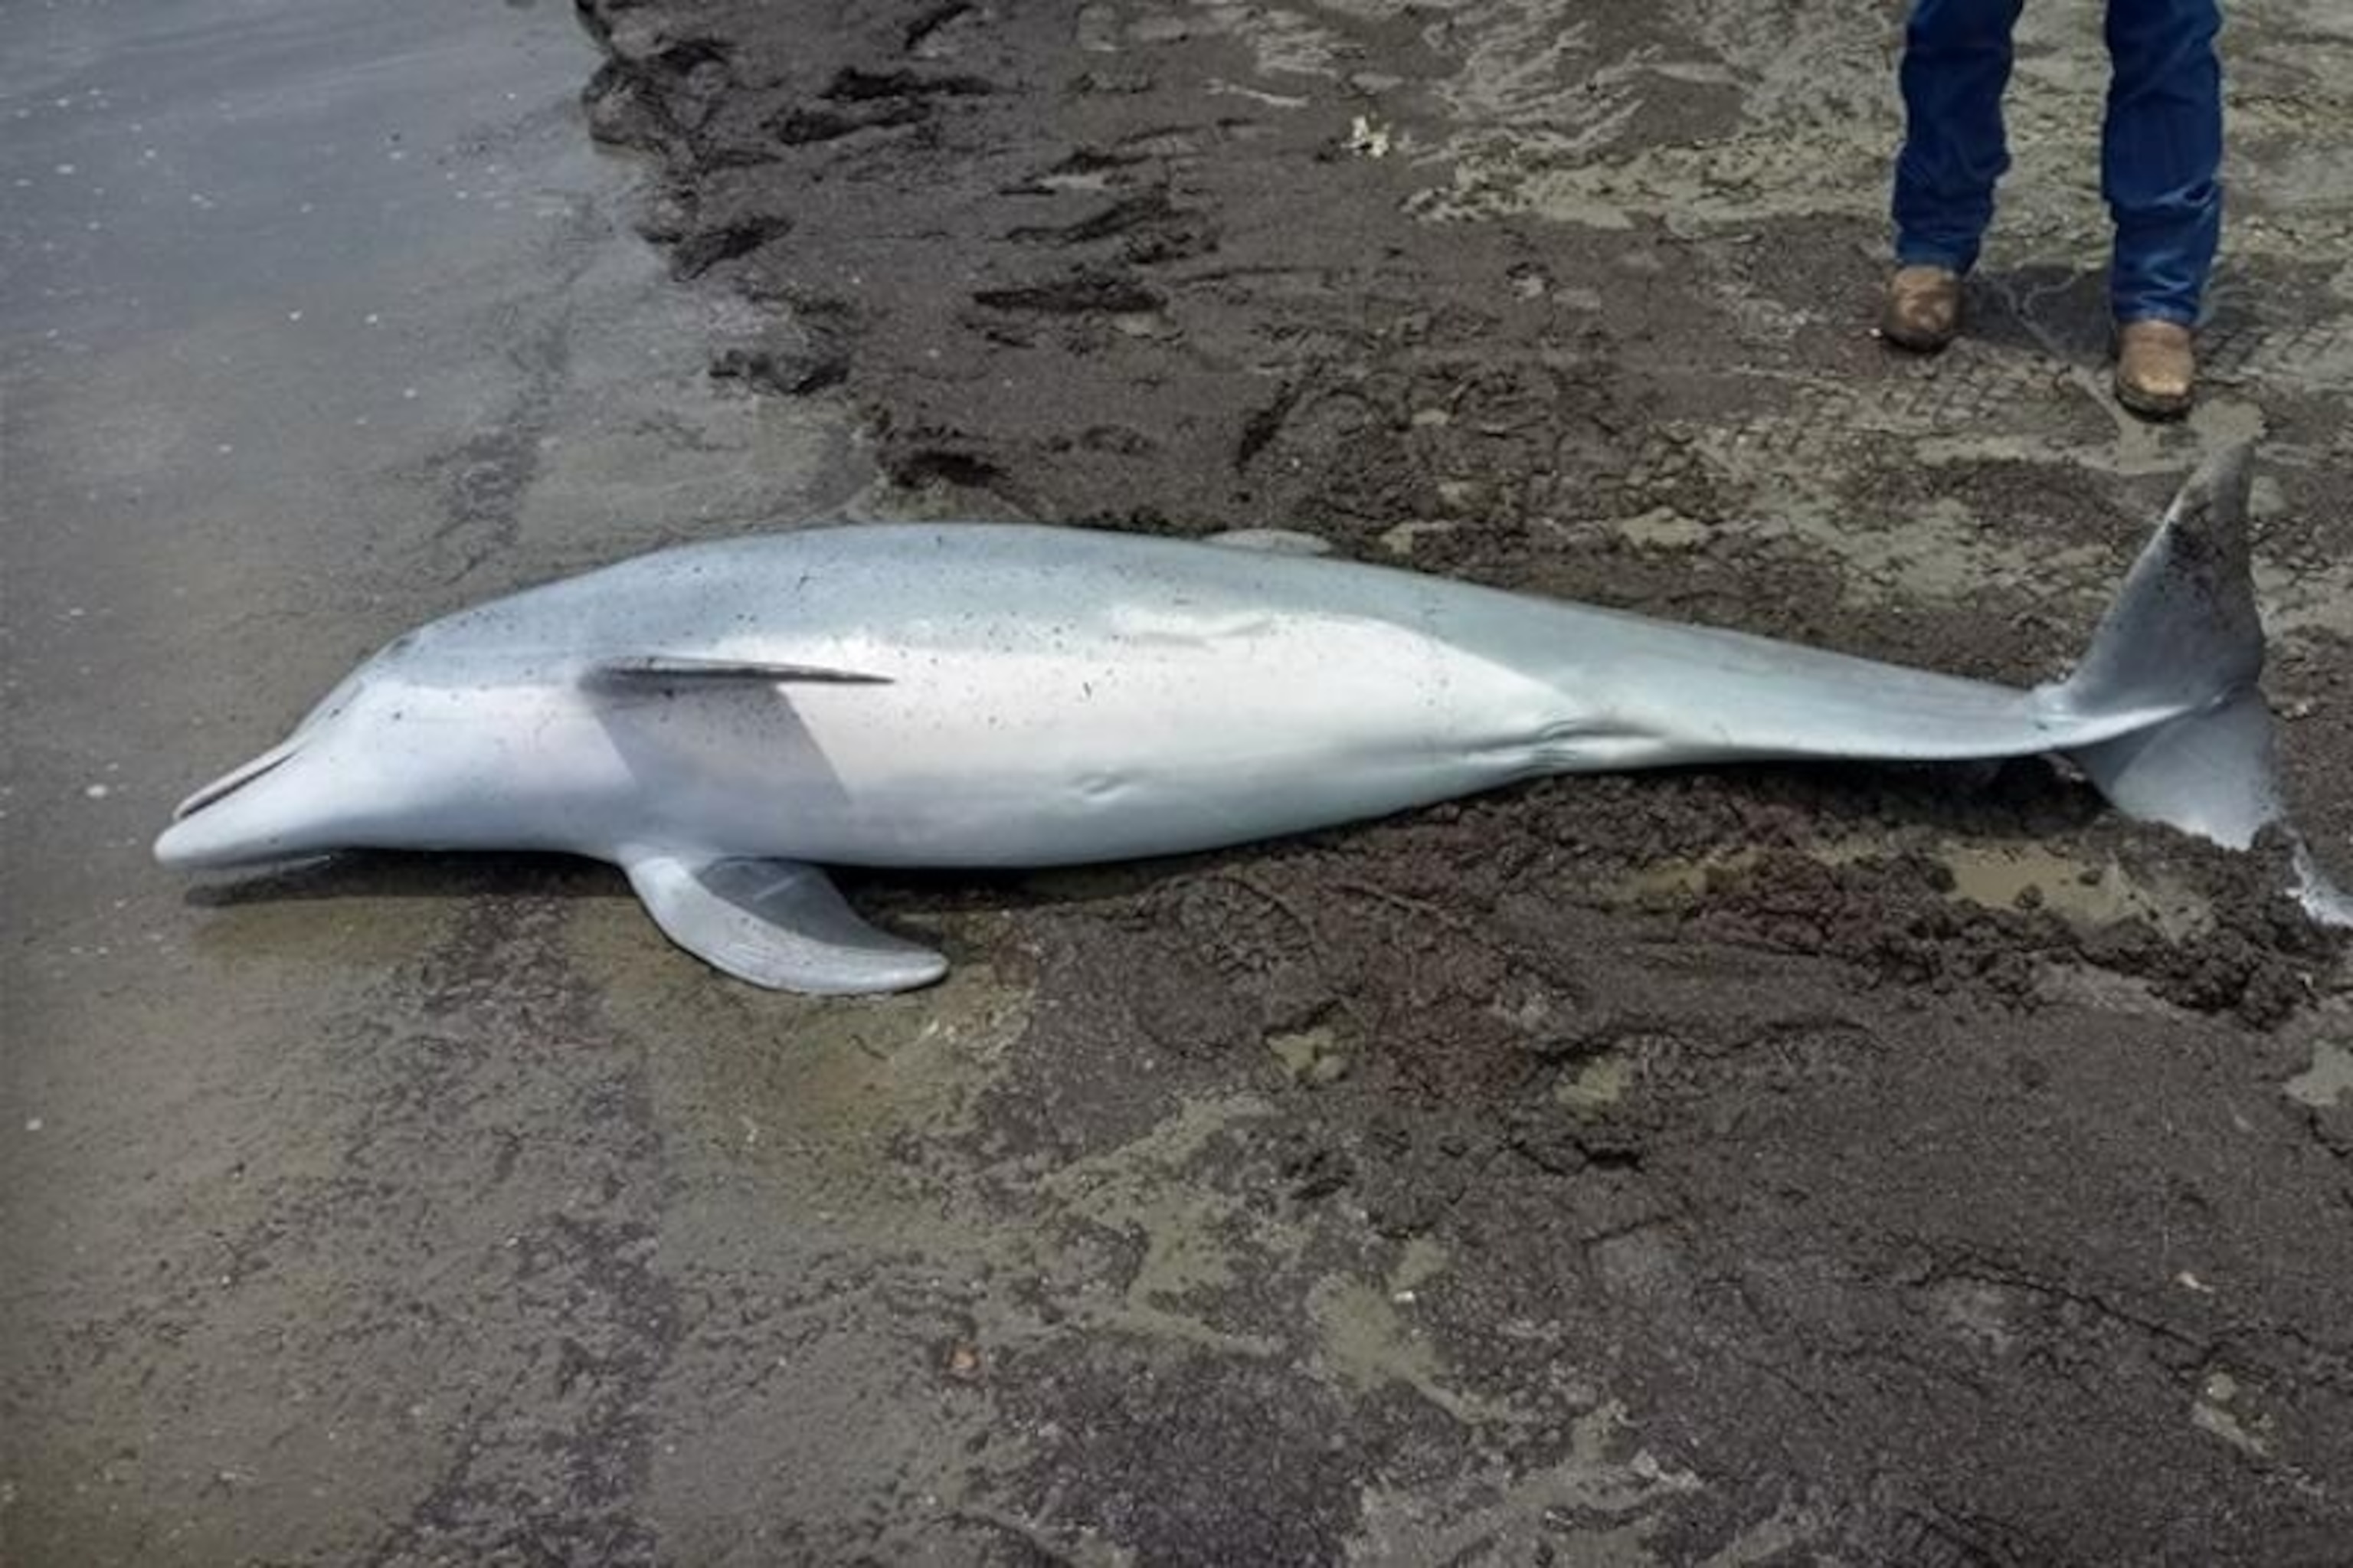 PHOTO: A juvenile bottlenose dolphin was found shot to death with bullets lodged in its brain, spinal cord and heart and now authorities are offering a handsome reward for information on who committed the gruesome act.